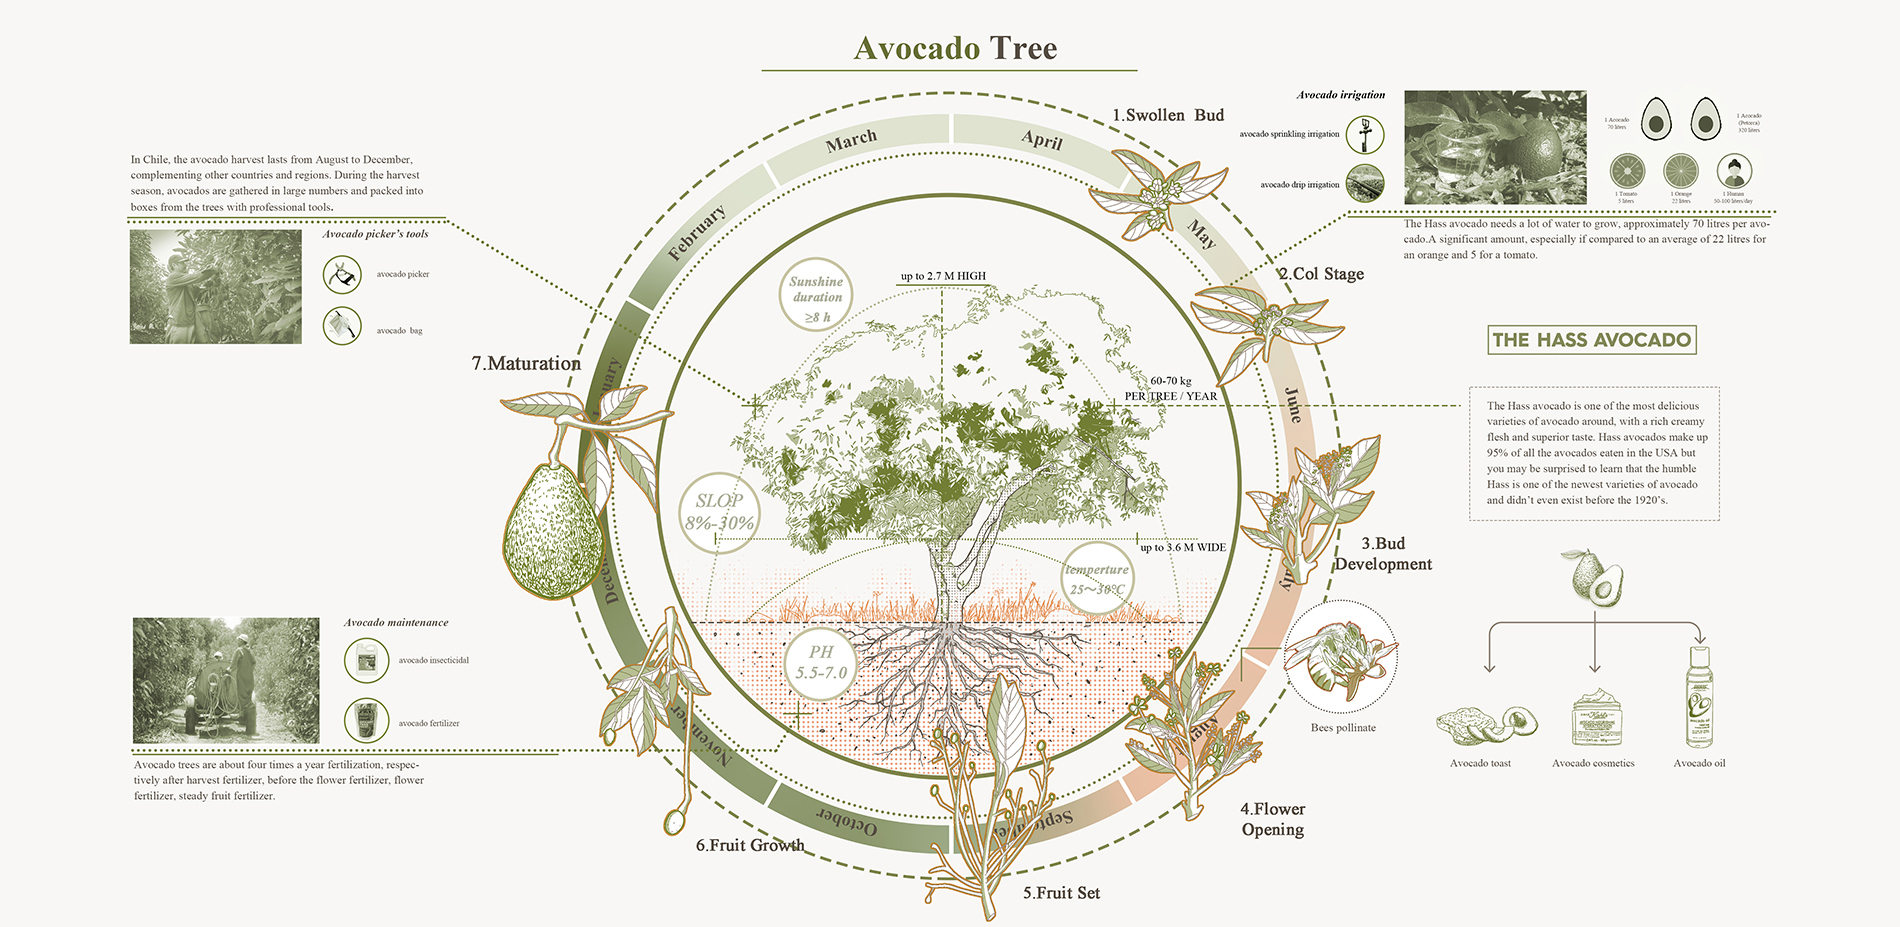 The planting cycle of avocado and its products